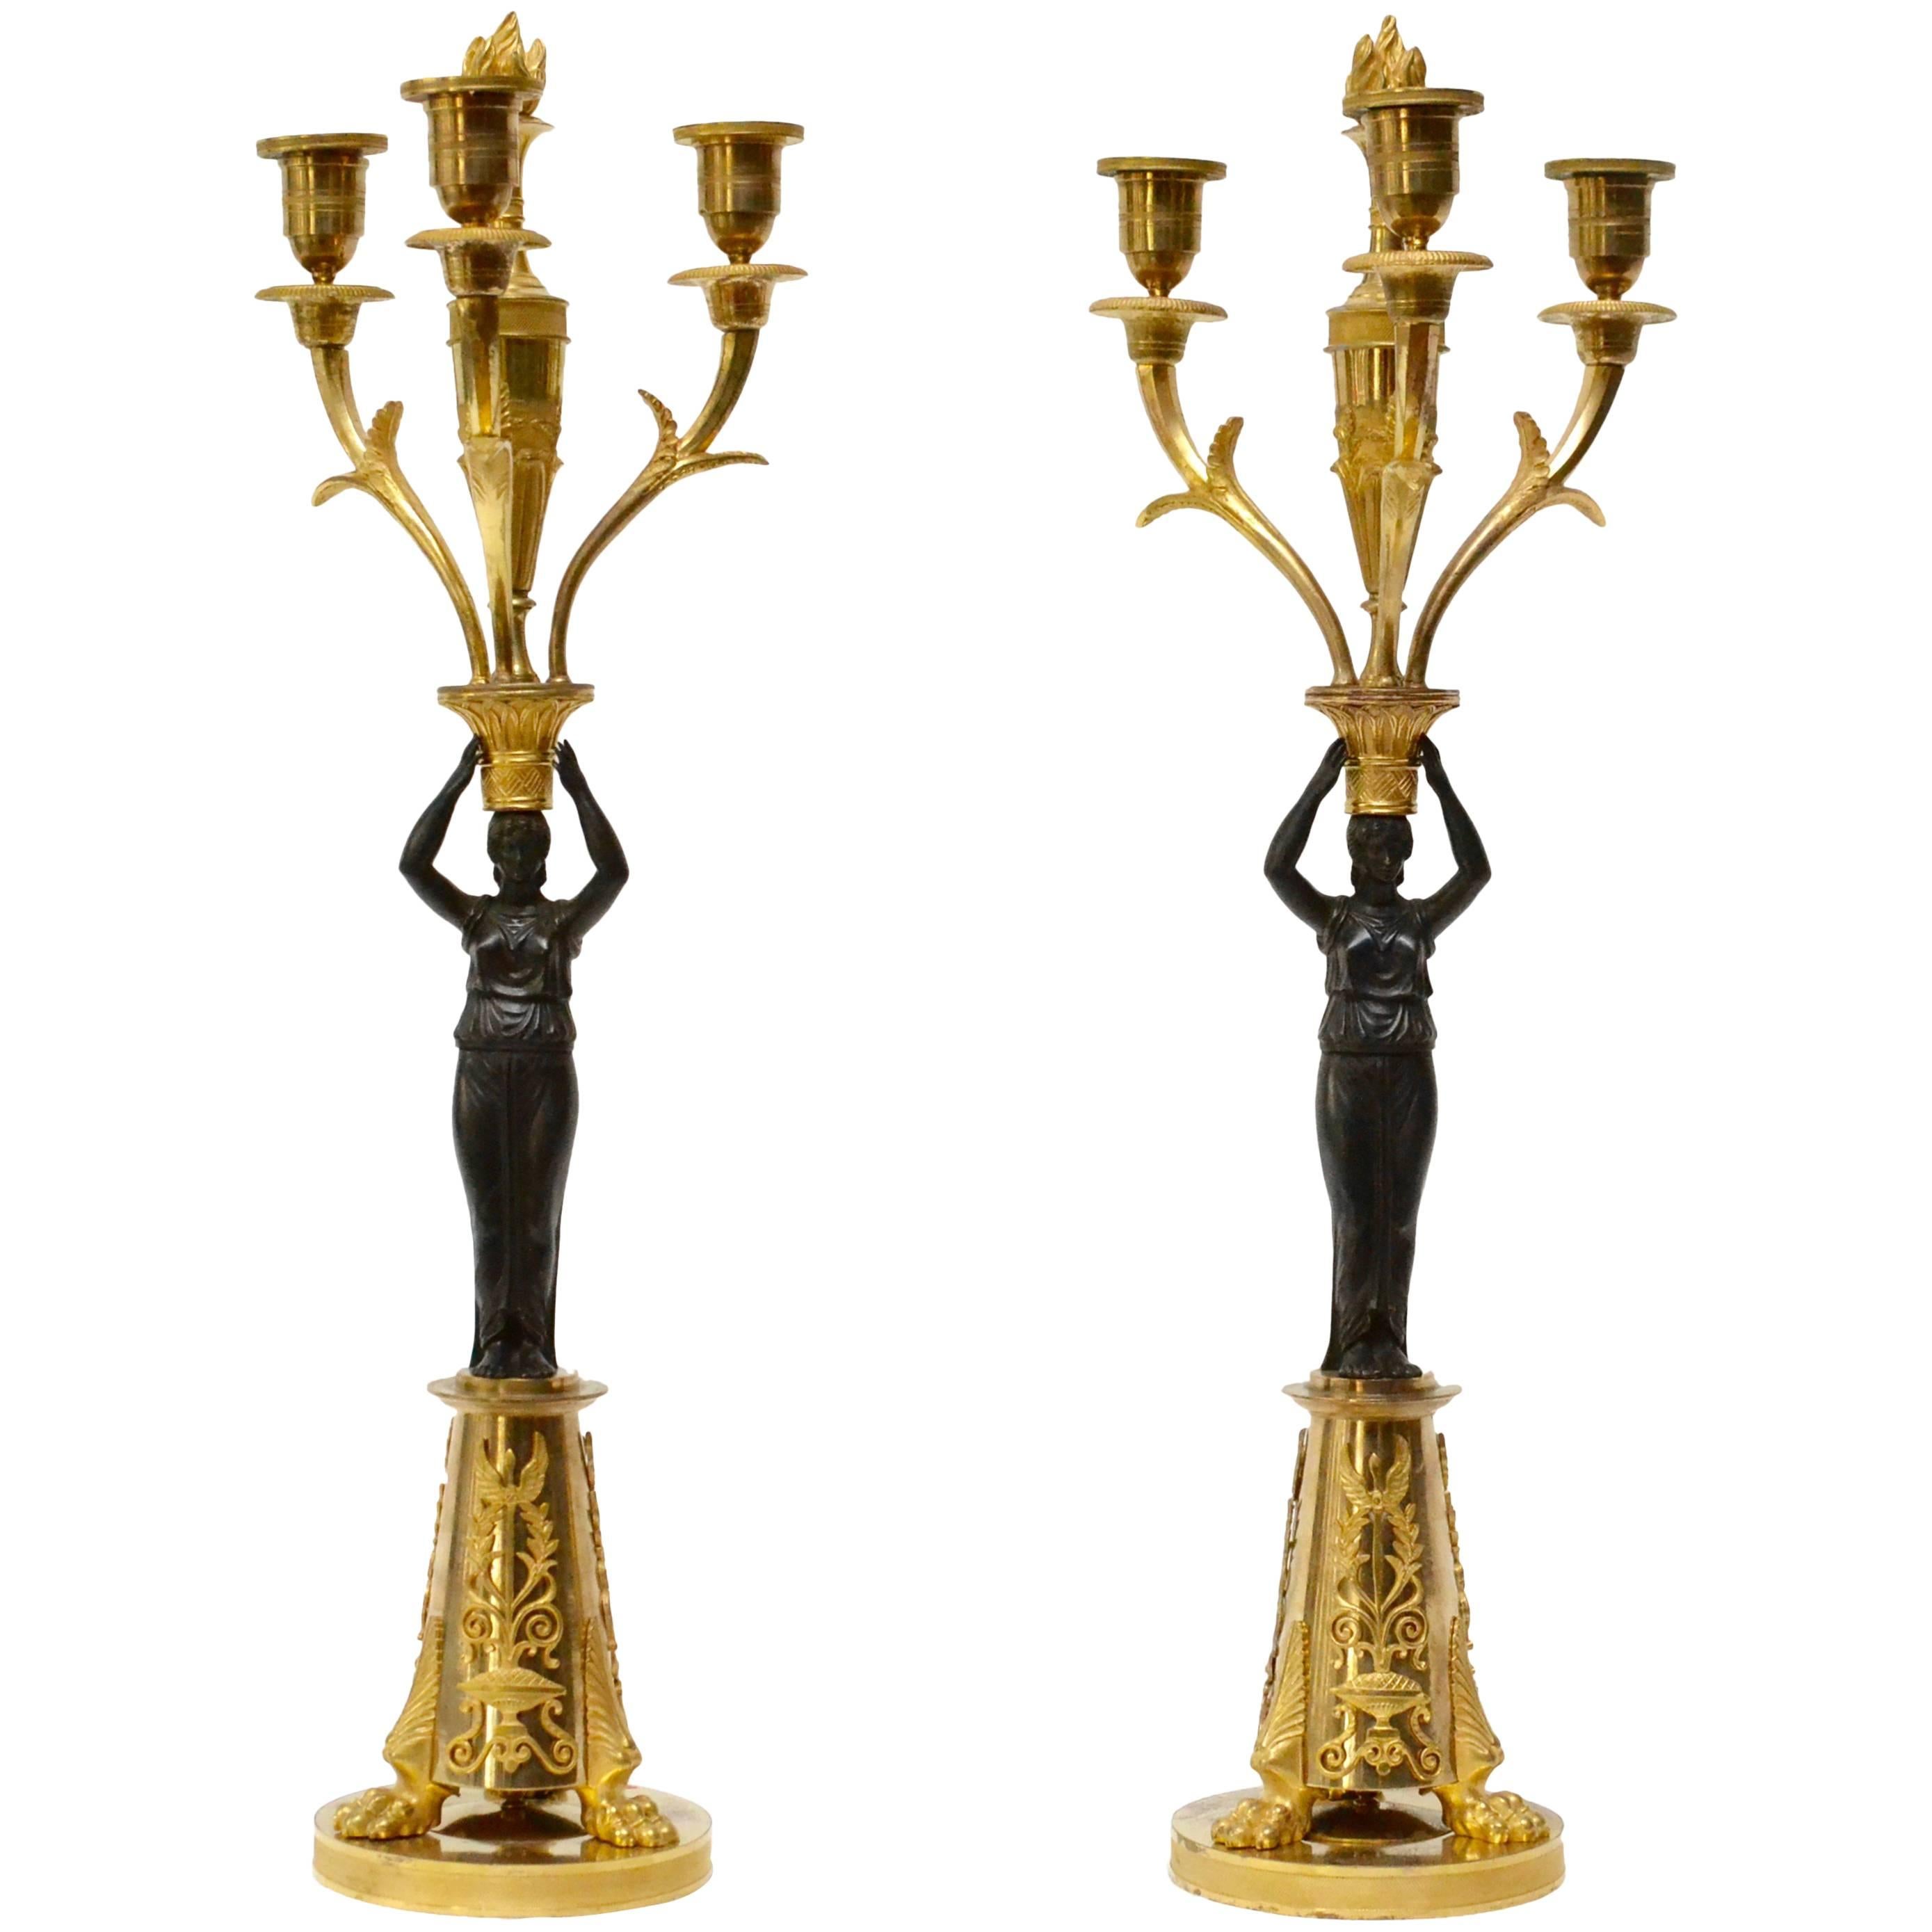 Pair of Empire Gilt Bronze and Patinated Candelabra, Possibly Germany